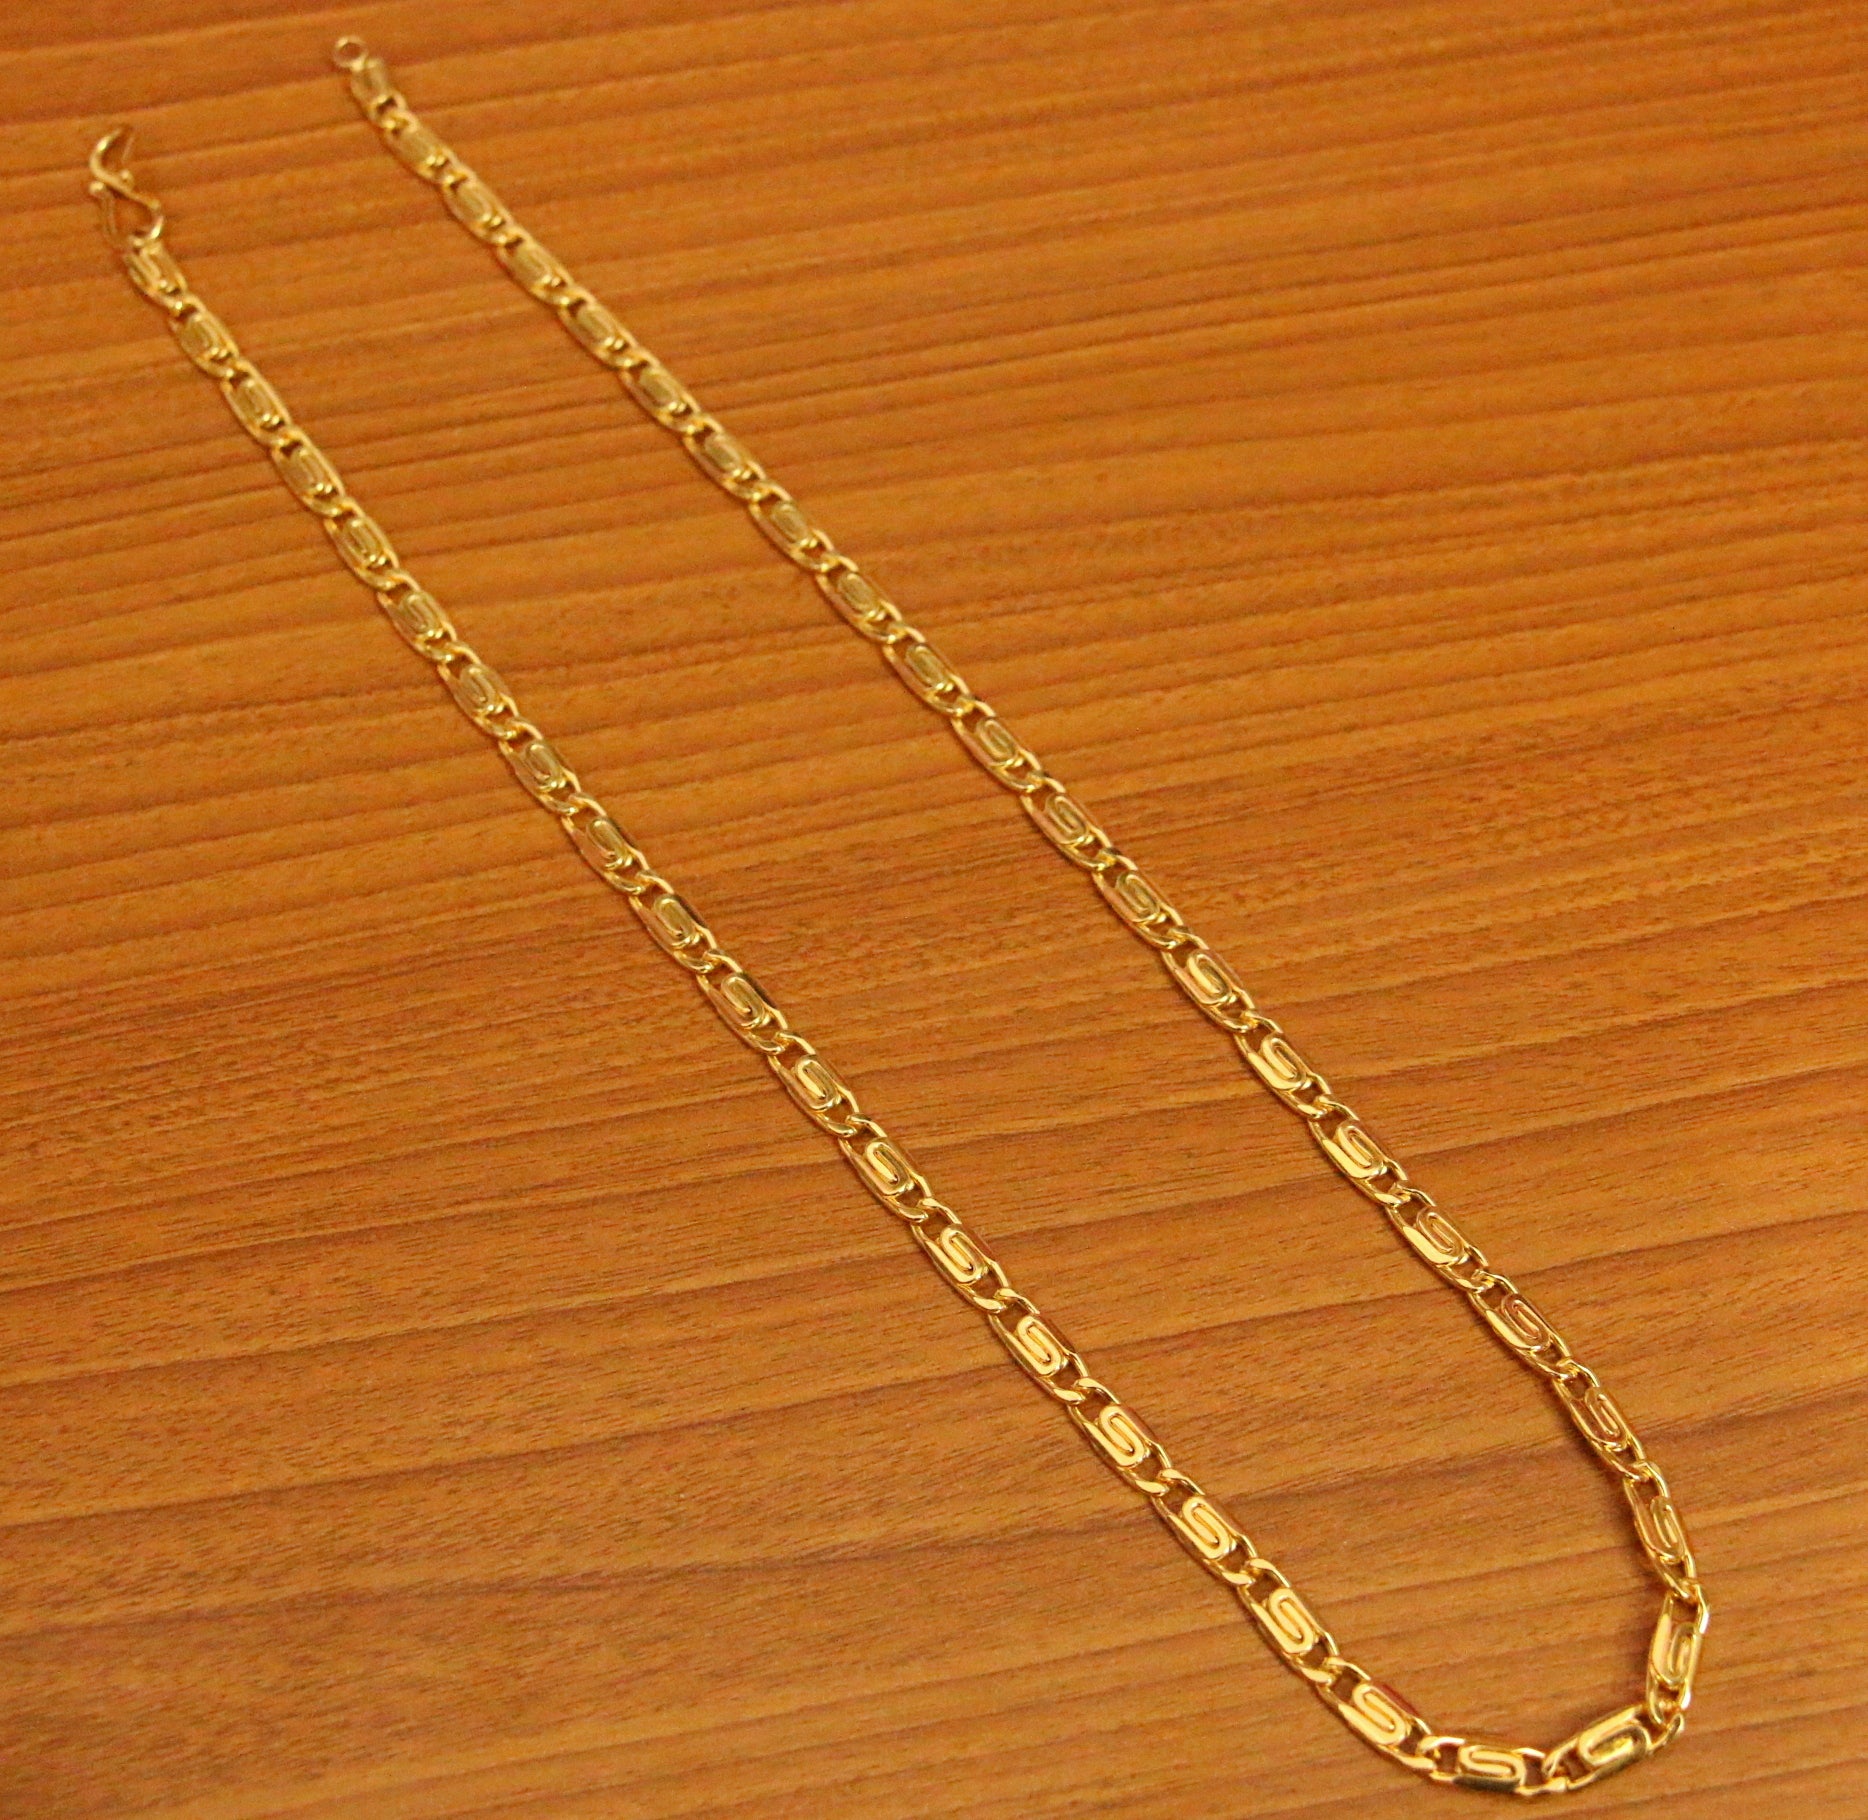 14K Gold Flat Curb Link Necklace - Zoe Lev Jewelry